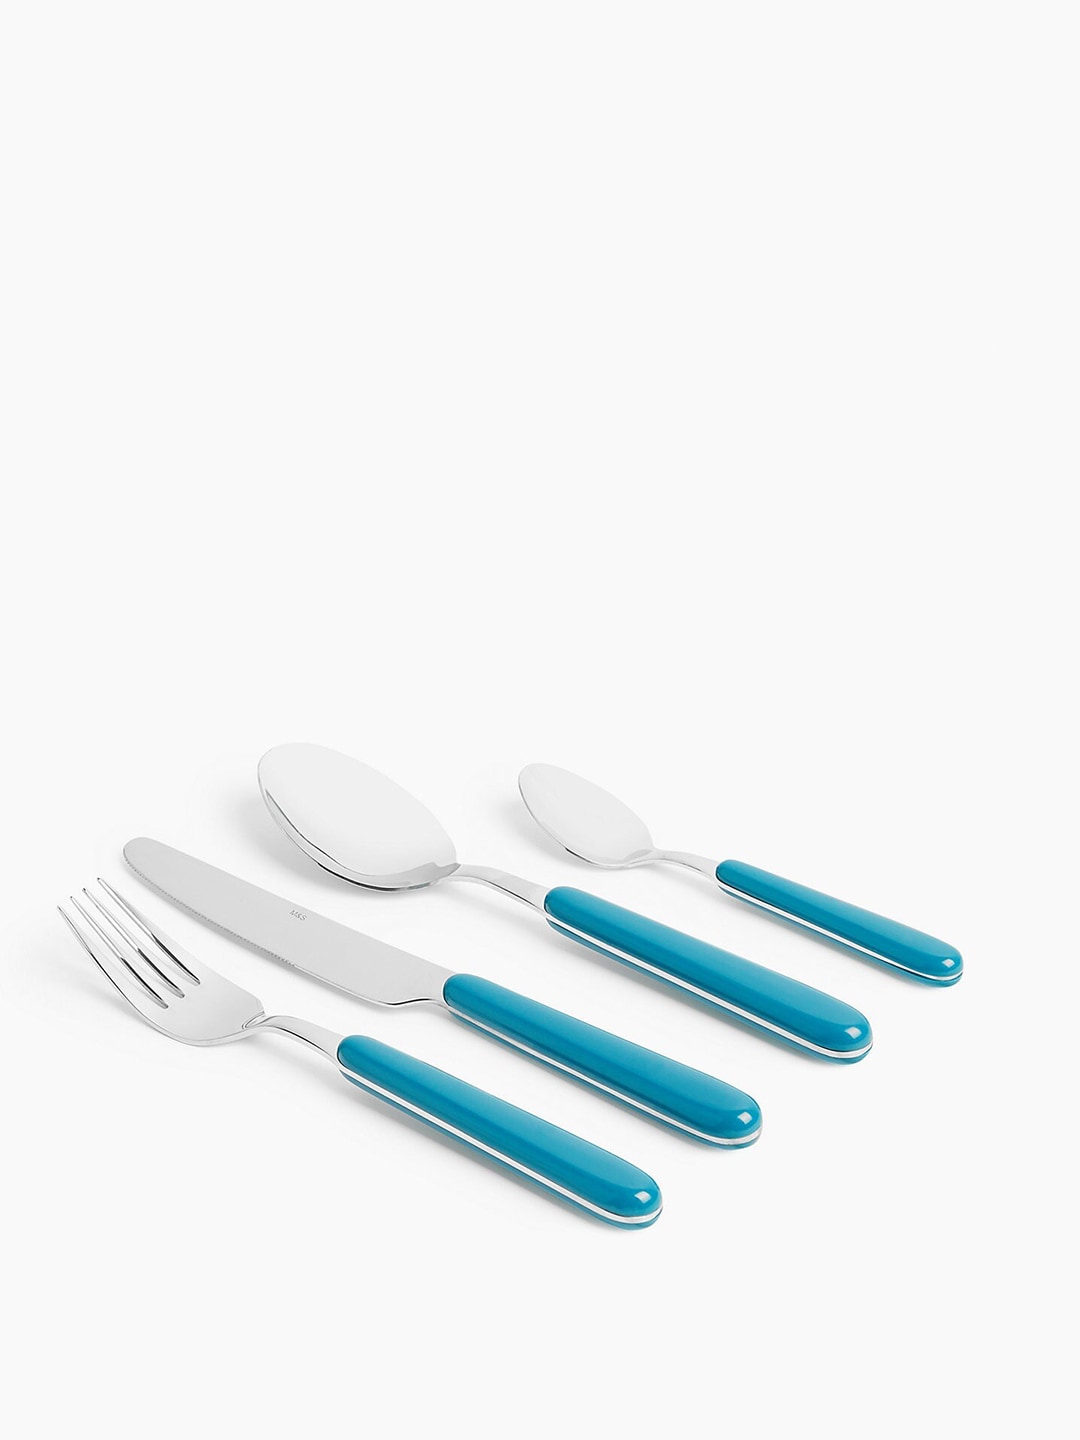 Marks & Spencer Set Of 16 Teal & White Stainless Steel Mixed Cutlery Set Price in India